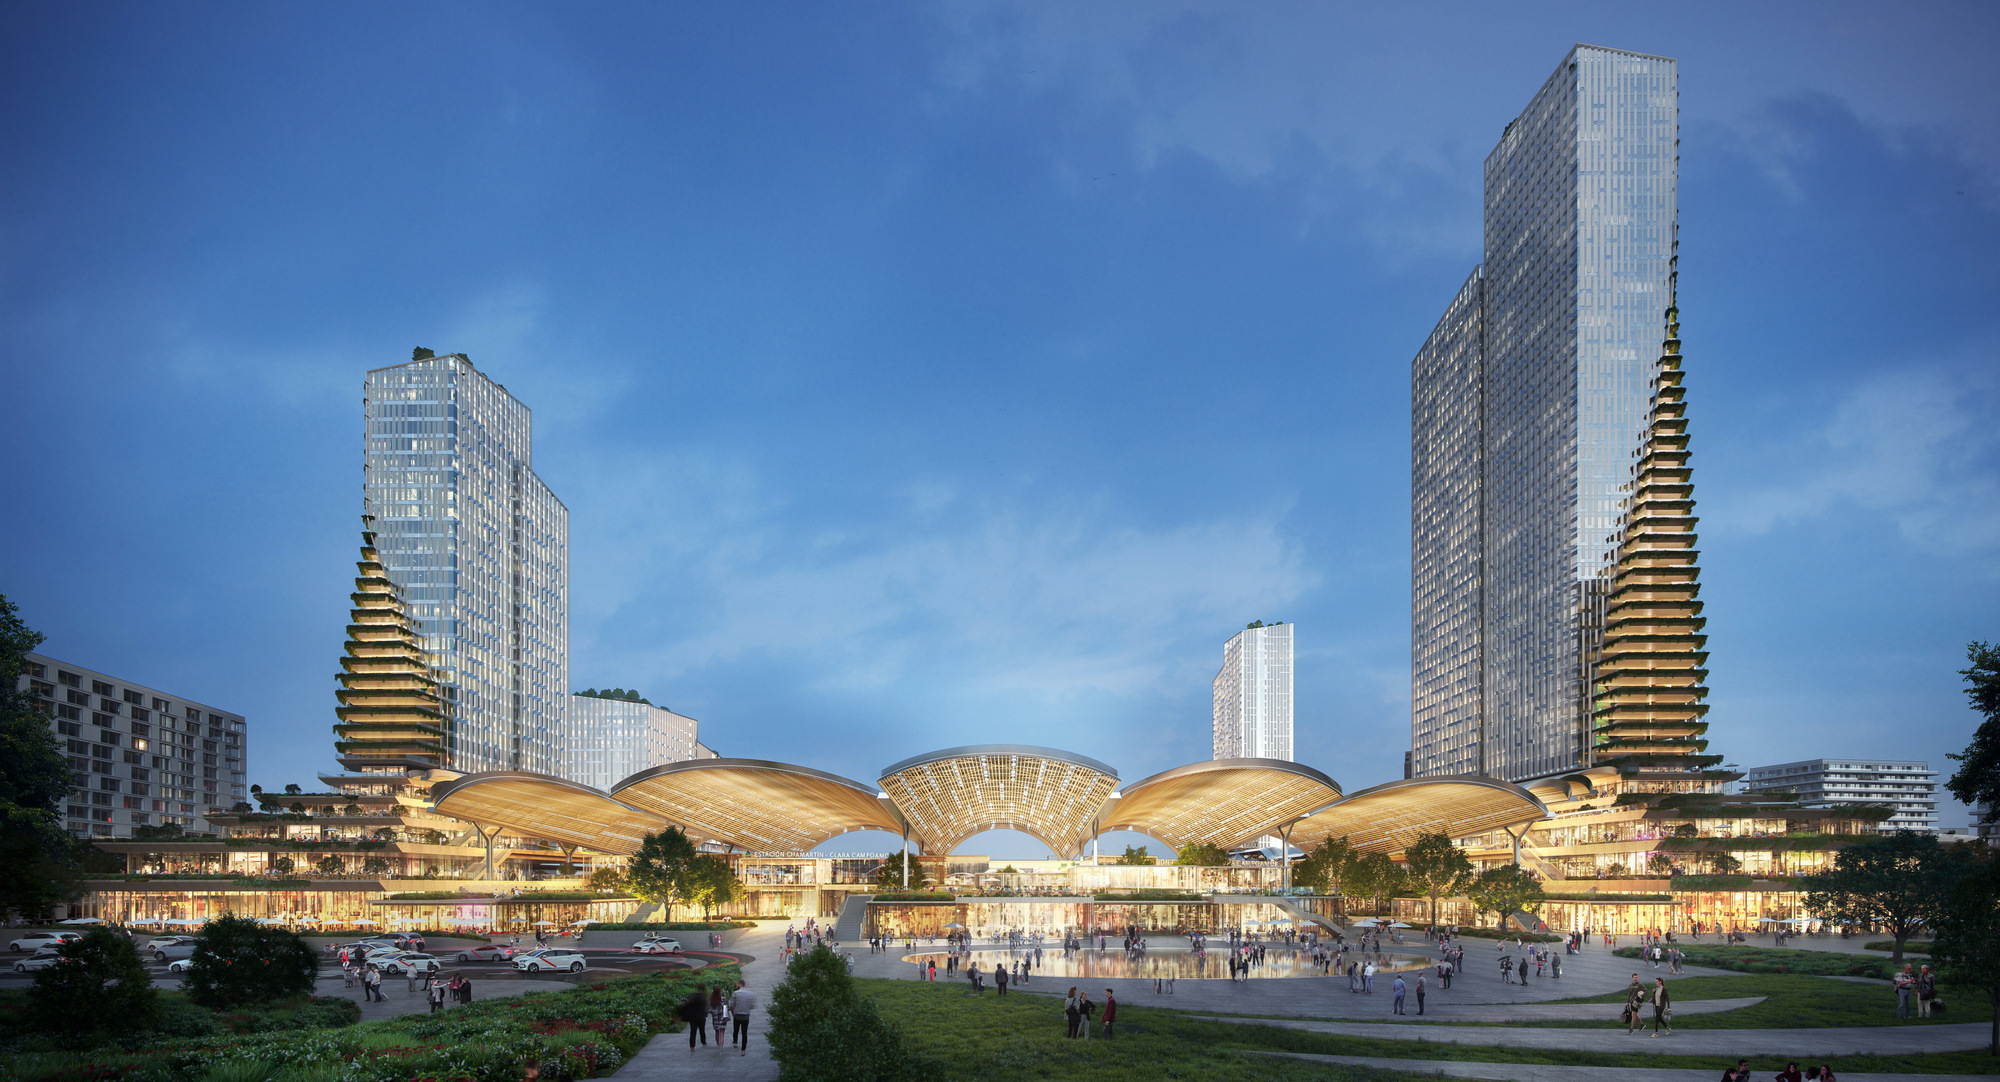 PRESS RELEASE | UNStudio, b720 Arquitectura and Esteyco's design receives top score for Madrid-Chamartín station, among proposals submitted by the world's leading architecture firms 